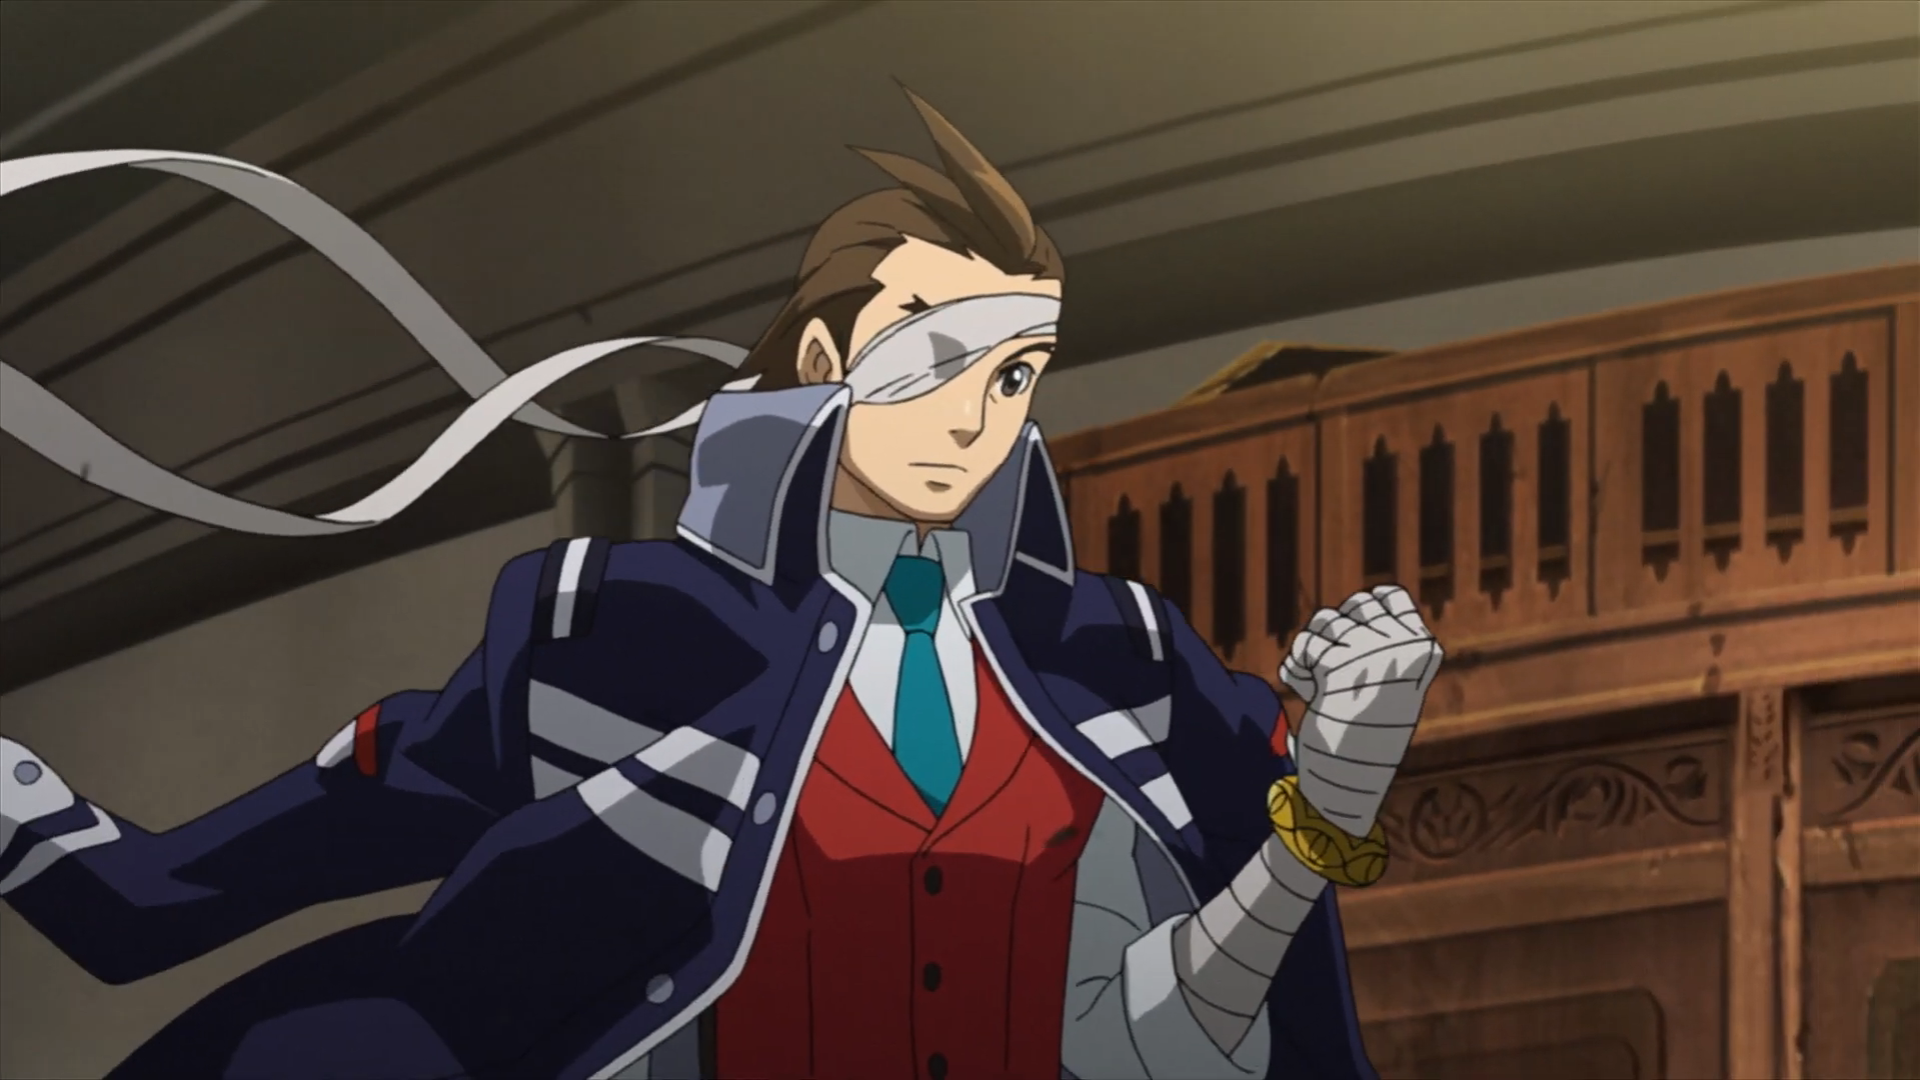 Apollo Justice: Ace Attorney Trilogy Takes 80-90 Hours to Complete, Says Producer